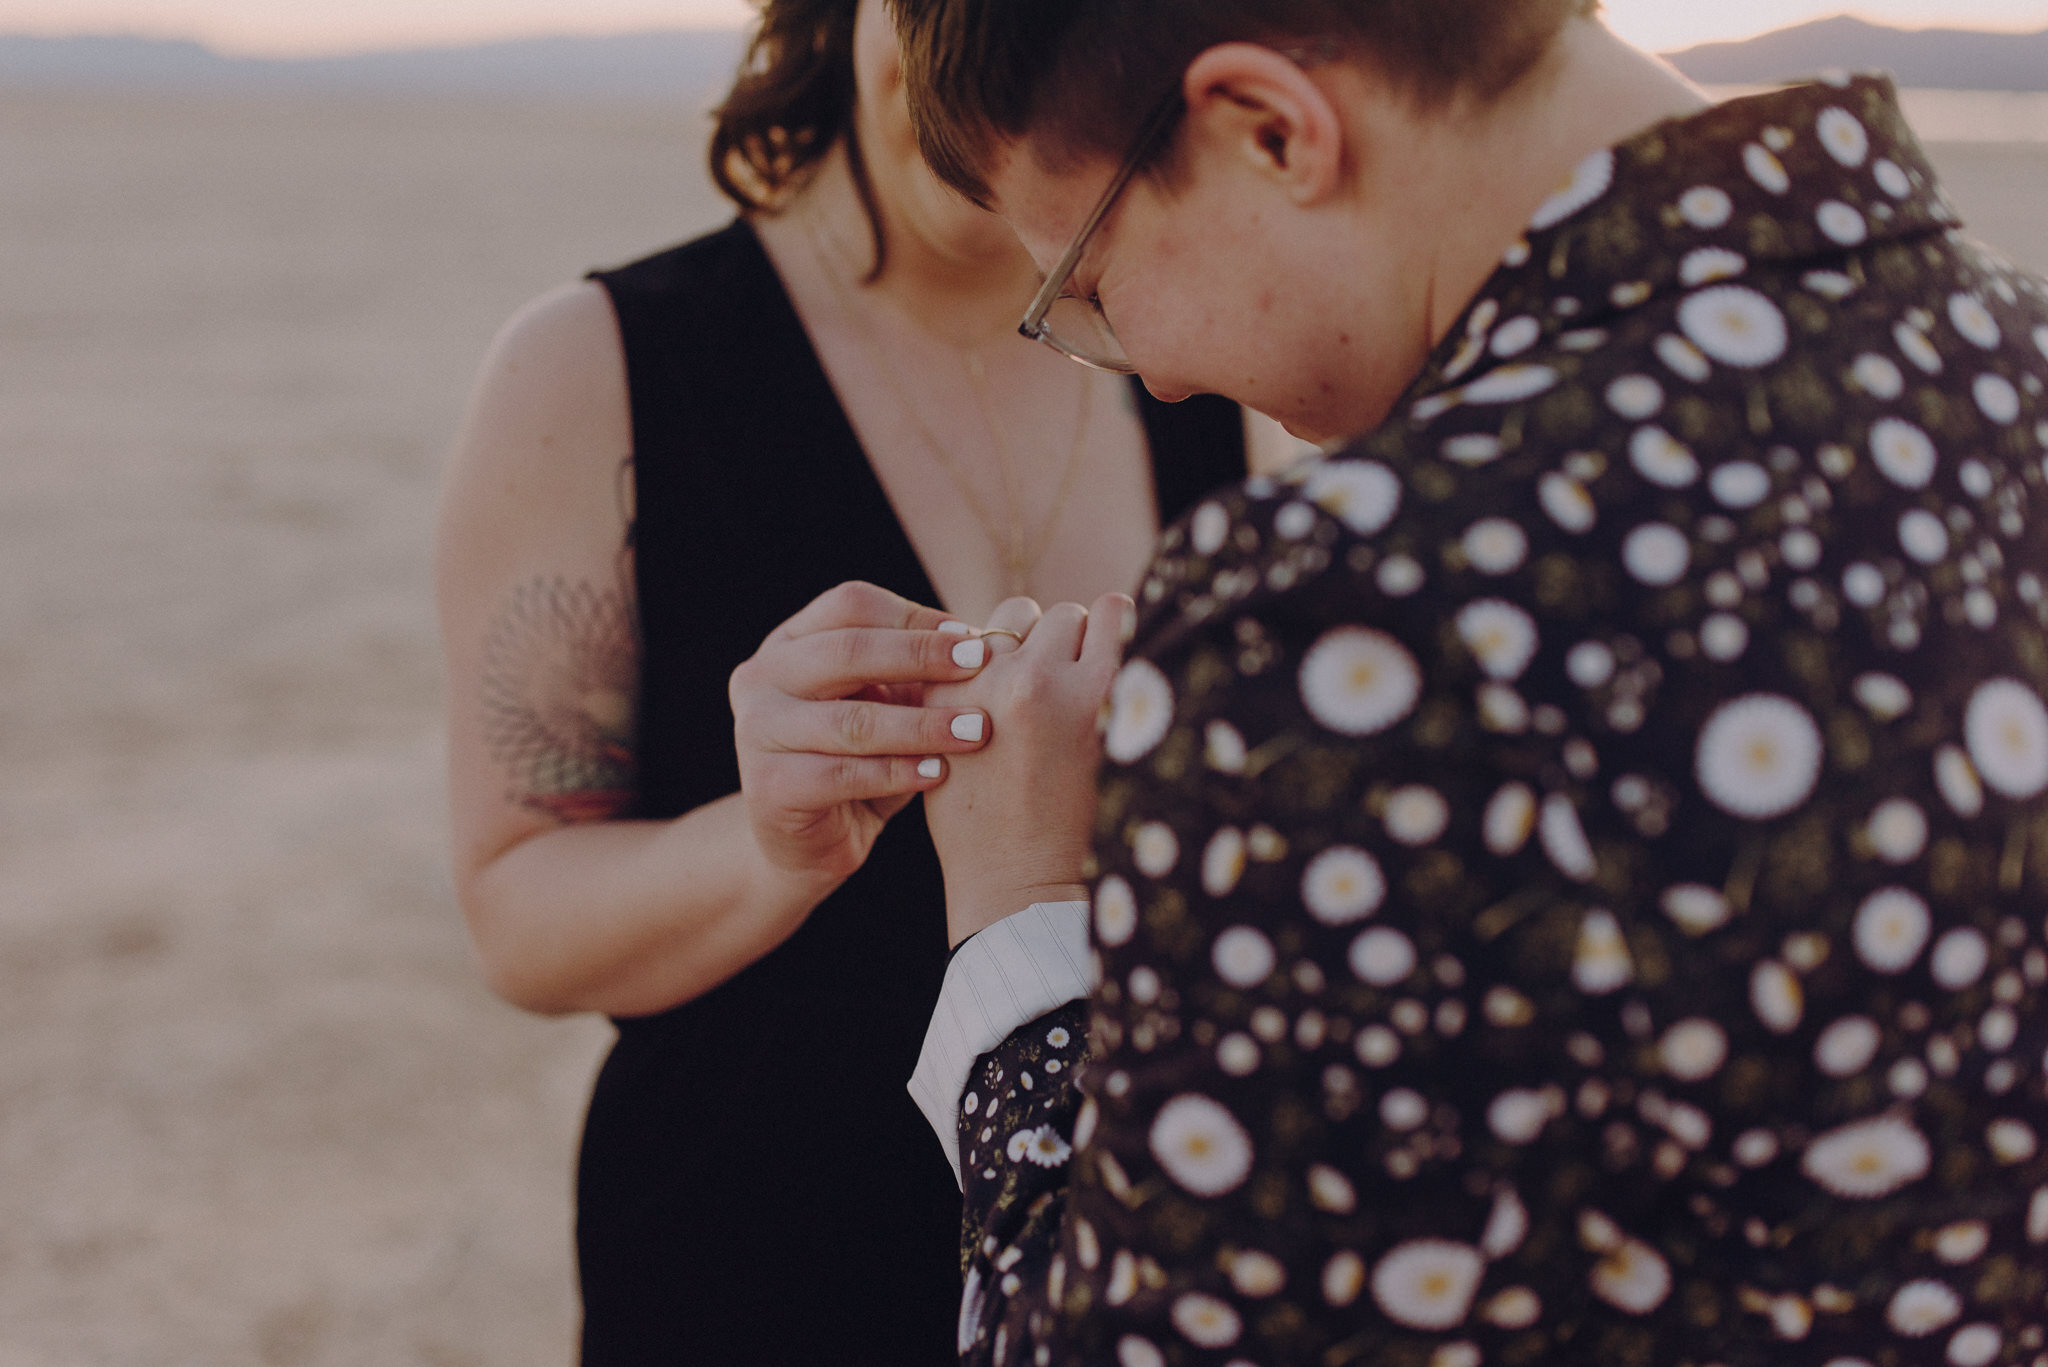 wedding photographer in los angeles - lgbtq wedding photographer - queer engagement session - isaiahandtaylor.com-021.jpg